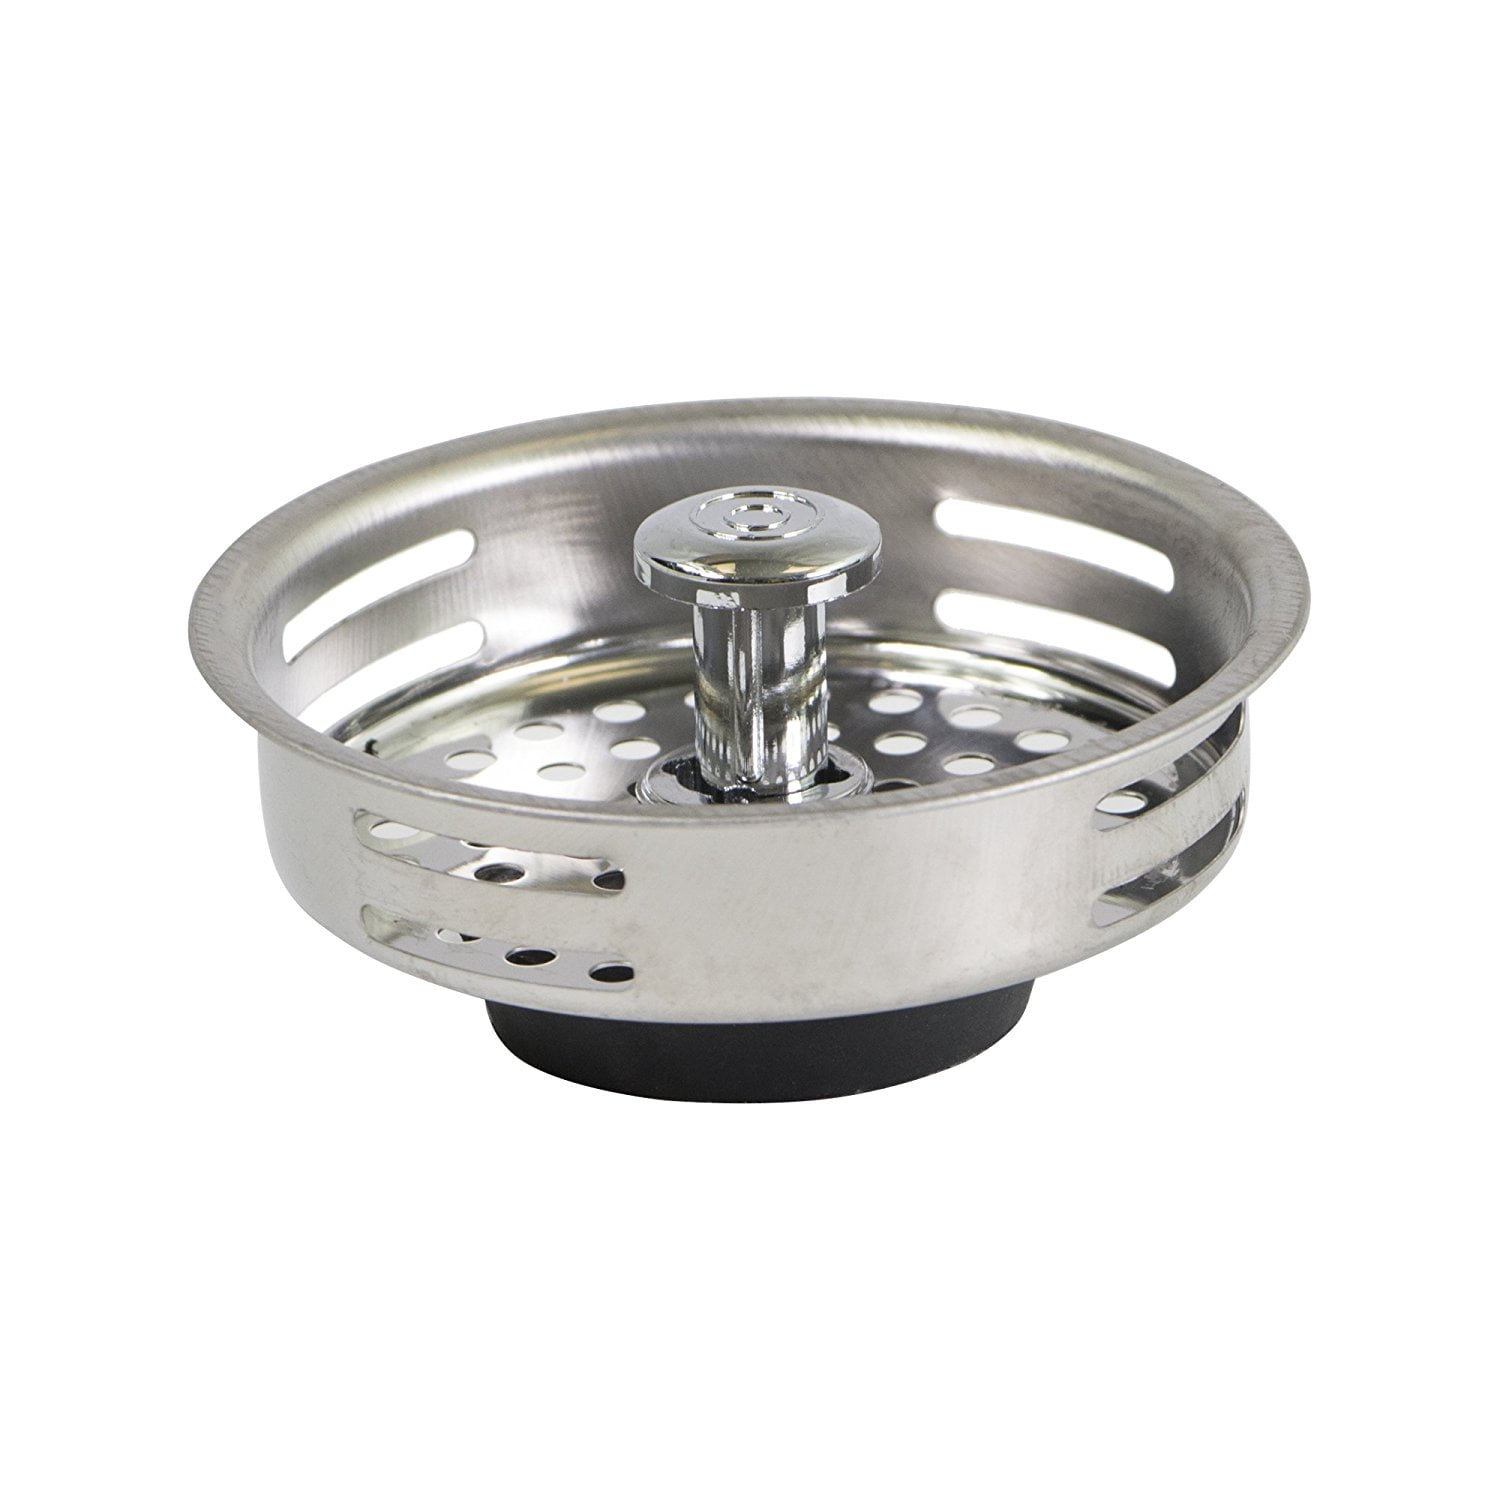 Everflow Stainless Steel Kitchen Sink Strainer Basket Replacement For Standard Drains 3 1 2 Inch Universal Style Rubber Stopper